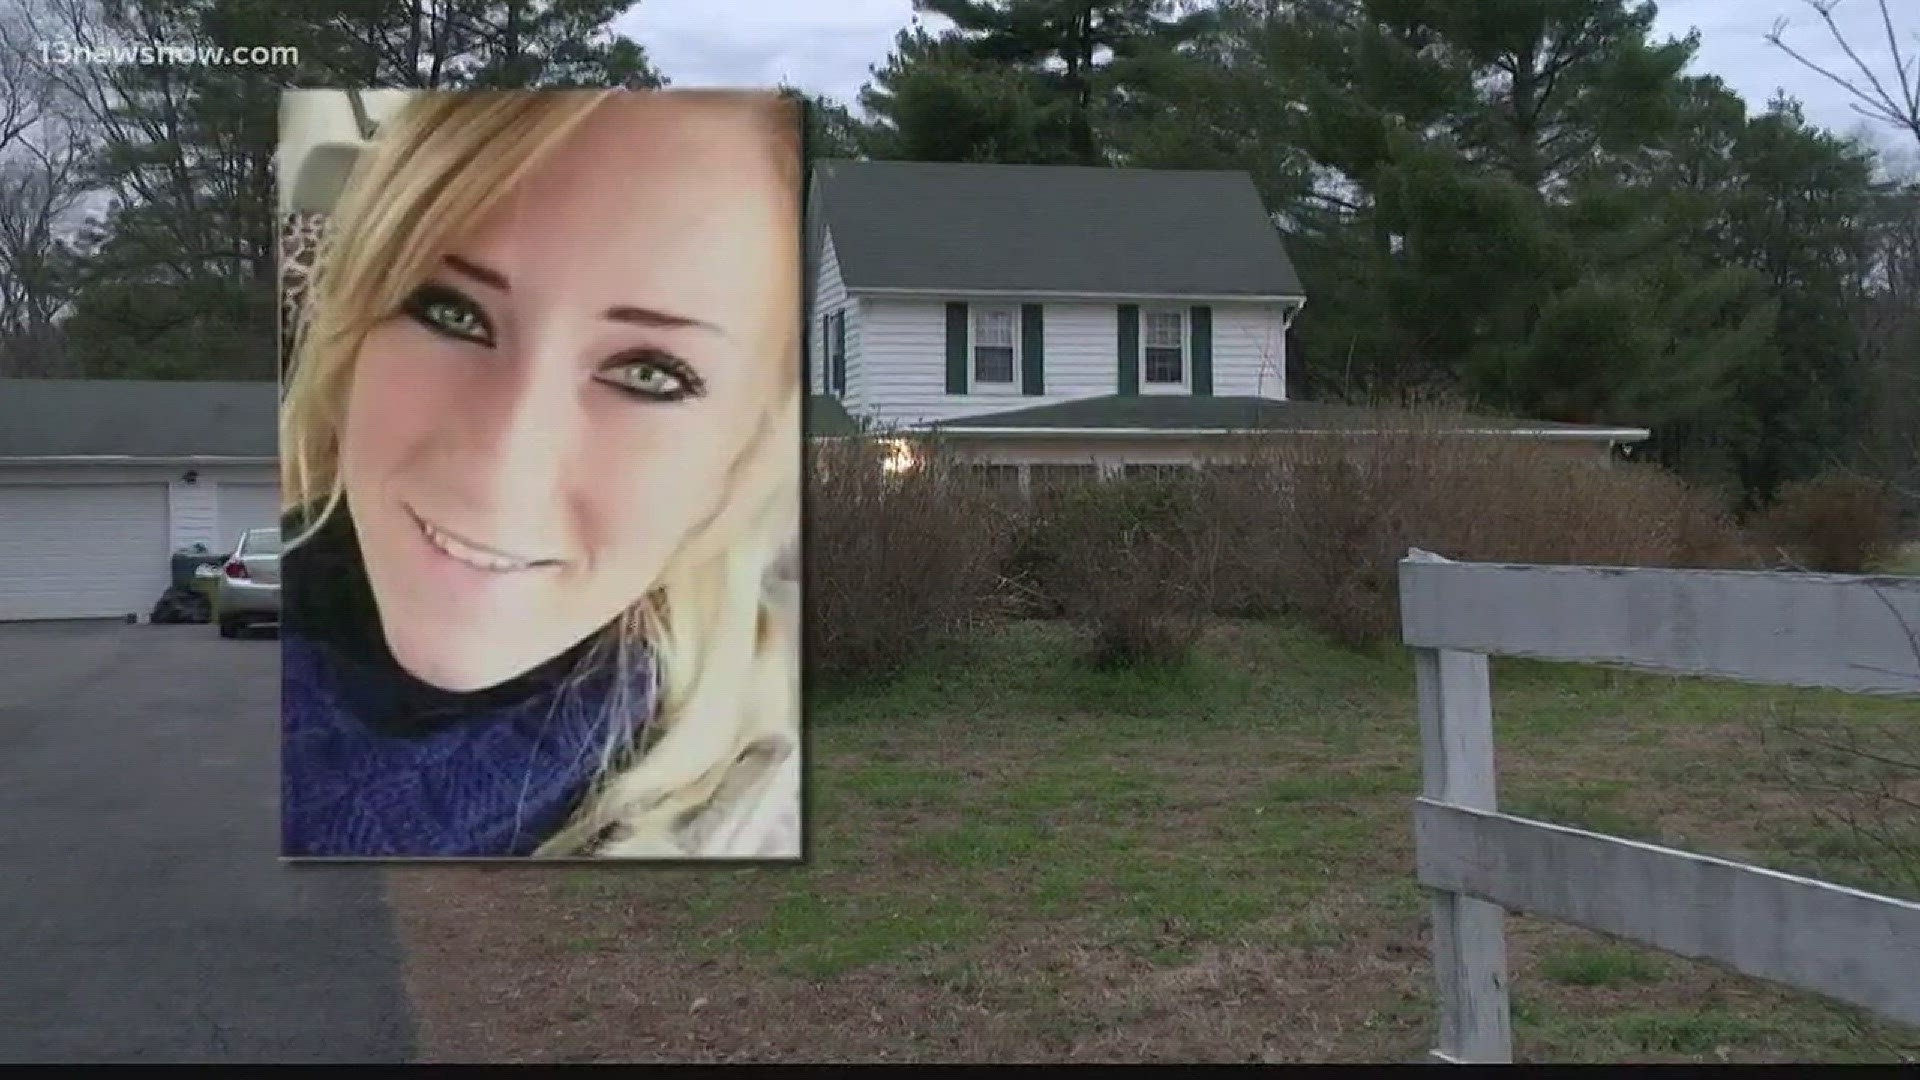 The search for a young mother continues into the night in Middlesex County.